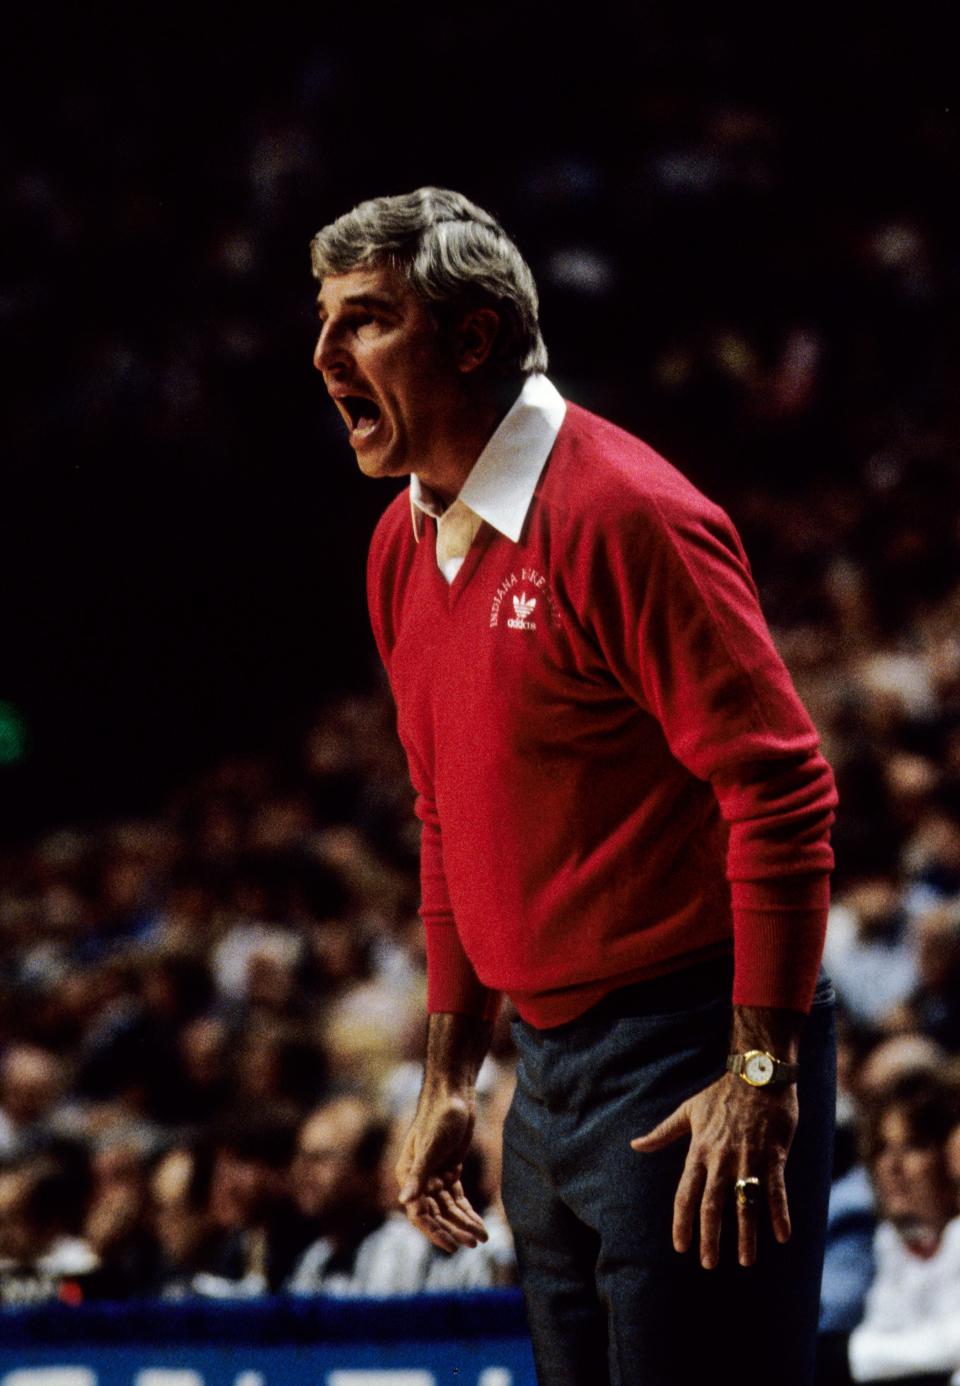 Dec 7, 1985; Lexington, KY, USA; FILE PHOTO; Indiana Hoosiers head coach Bobby Knight reacts on the sideline against the Kentucky Wildcats during the 1985-86 season. Mandatory Credit: Malcolm Emmons-USA TODAY Sports